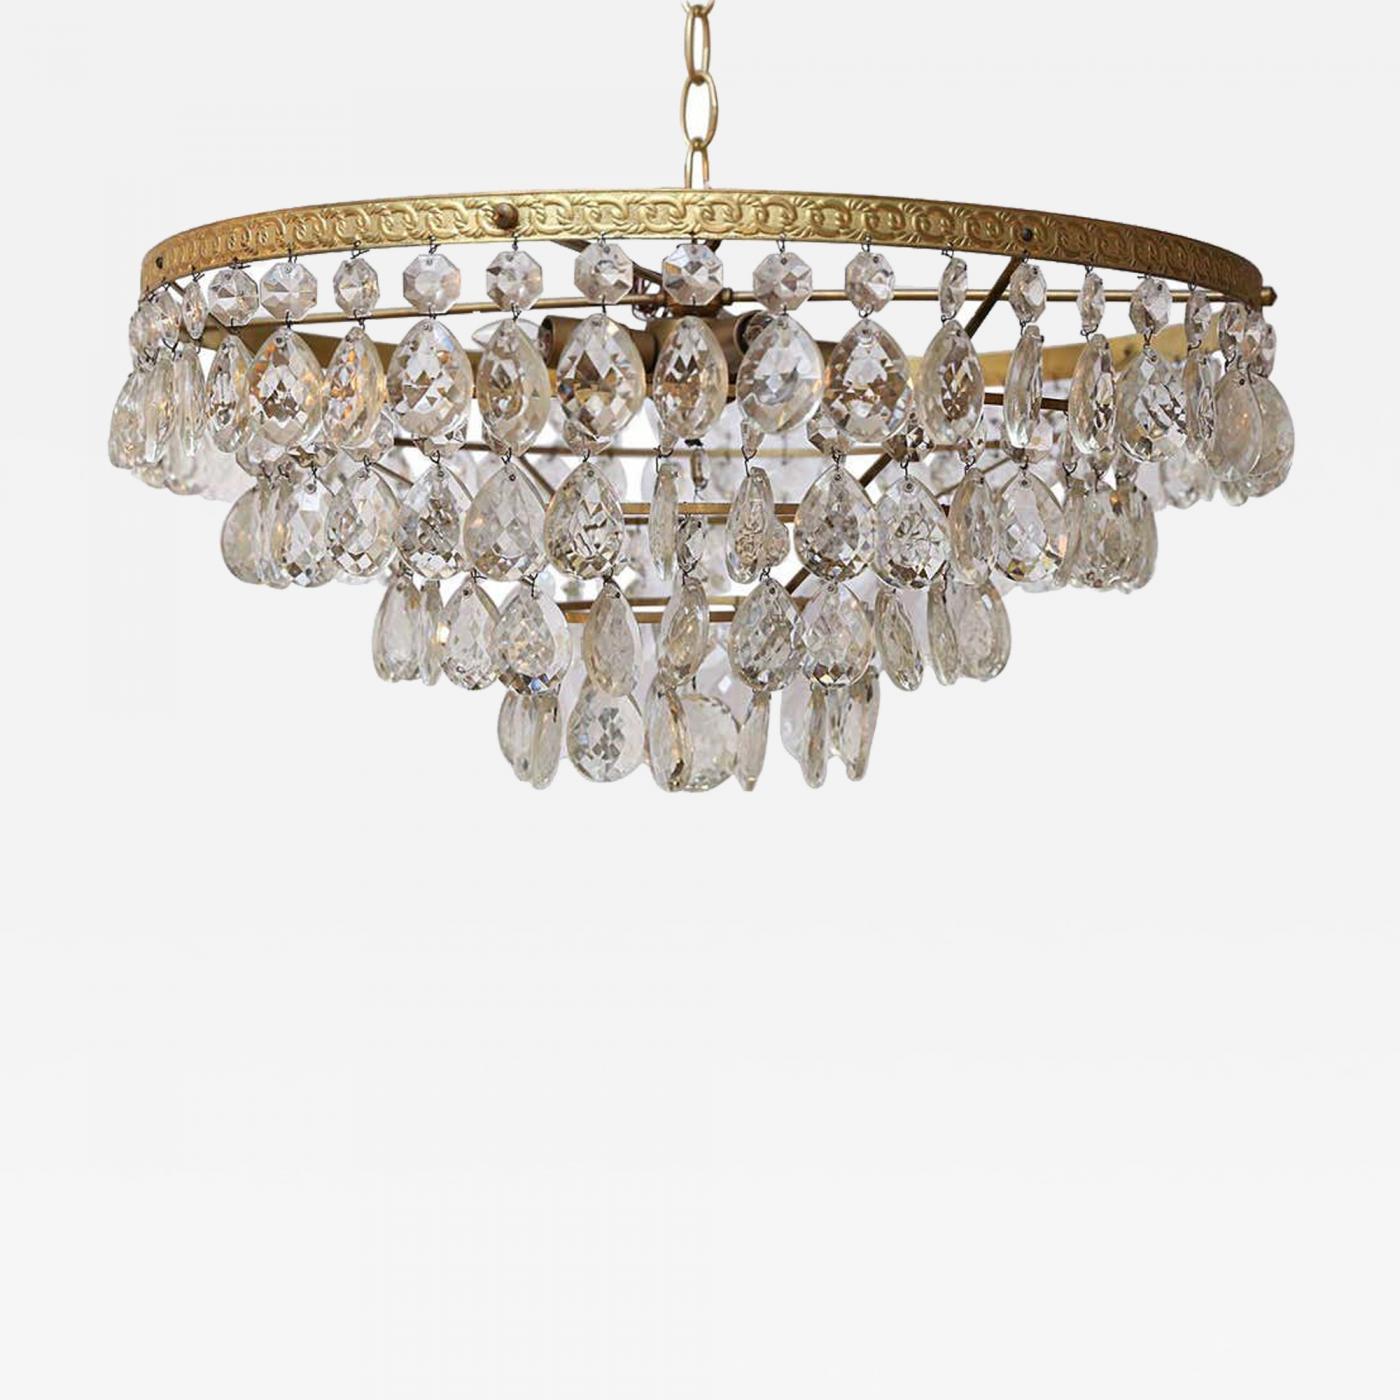 Gilt Brass and Crystal Mid-Century Modern Chandelier by Palwa